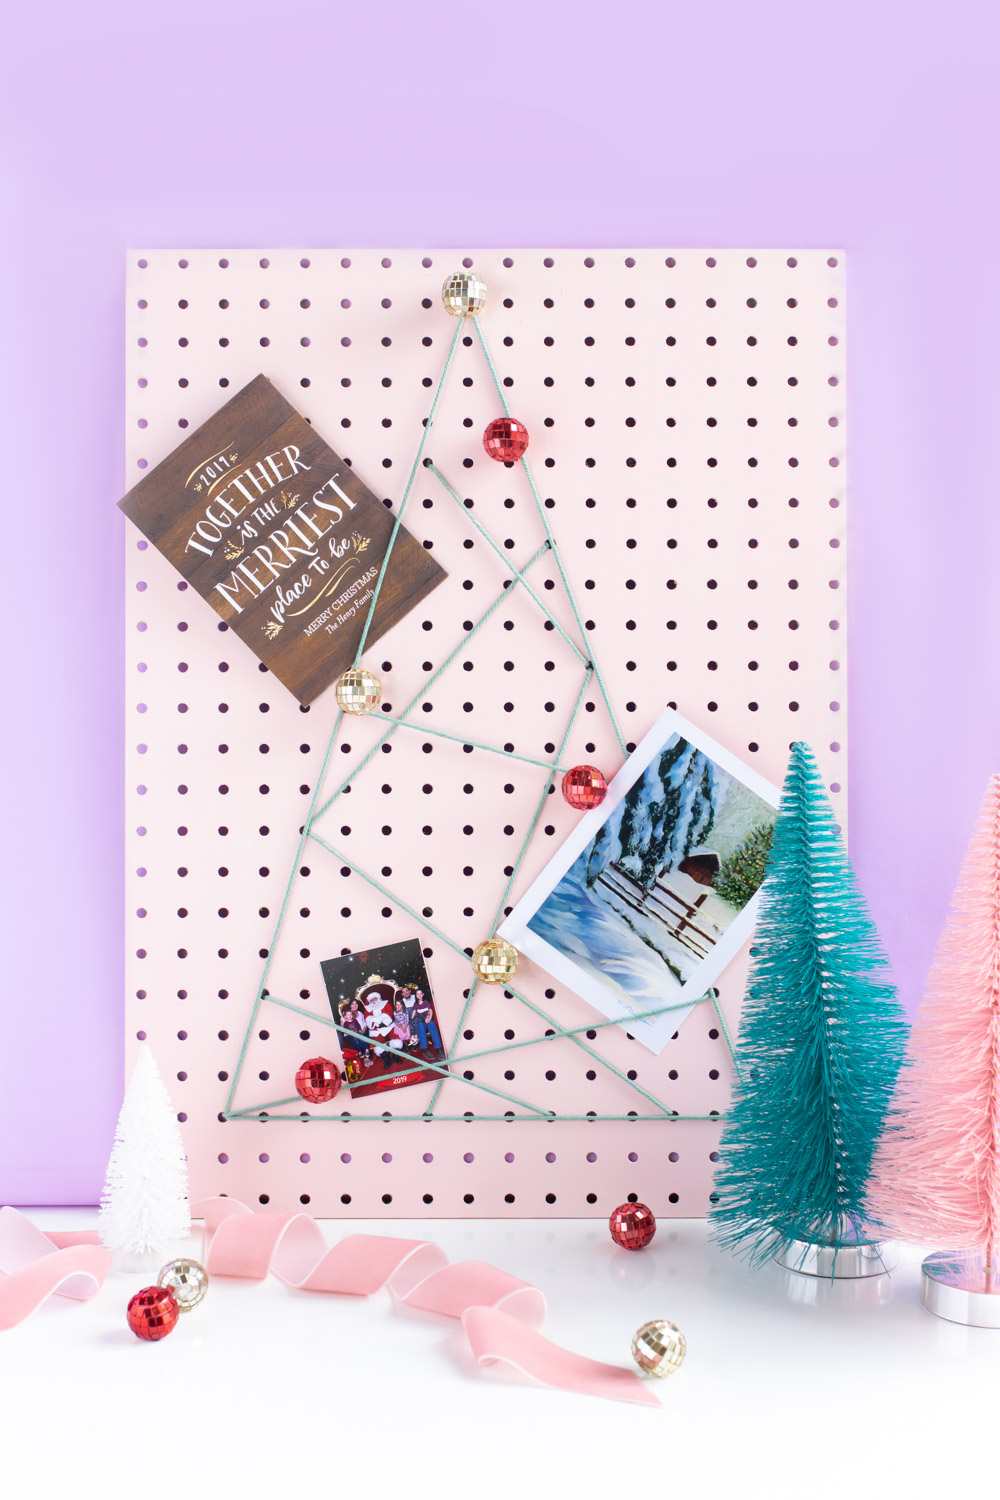 DIY Holiday Pegboard Card Holder // Turn a slab of pegboard into a fun Christmas tree card display inspired by string art! Display your holiday cards in a unique way with this DIY Christmas decor idea #christmasdiy #christmascard #christmasdecor #christmasstorage #pegboard #papercrafts #stringart #holidaystorage #cardstorage